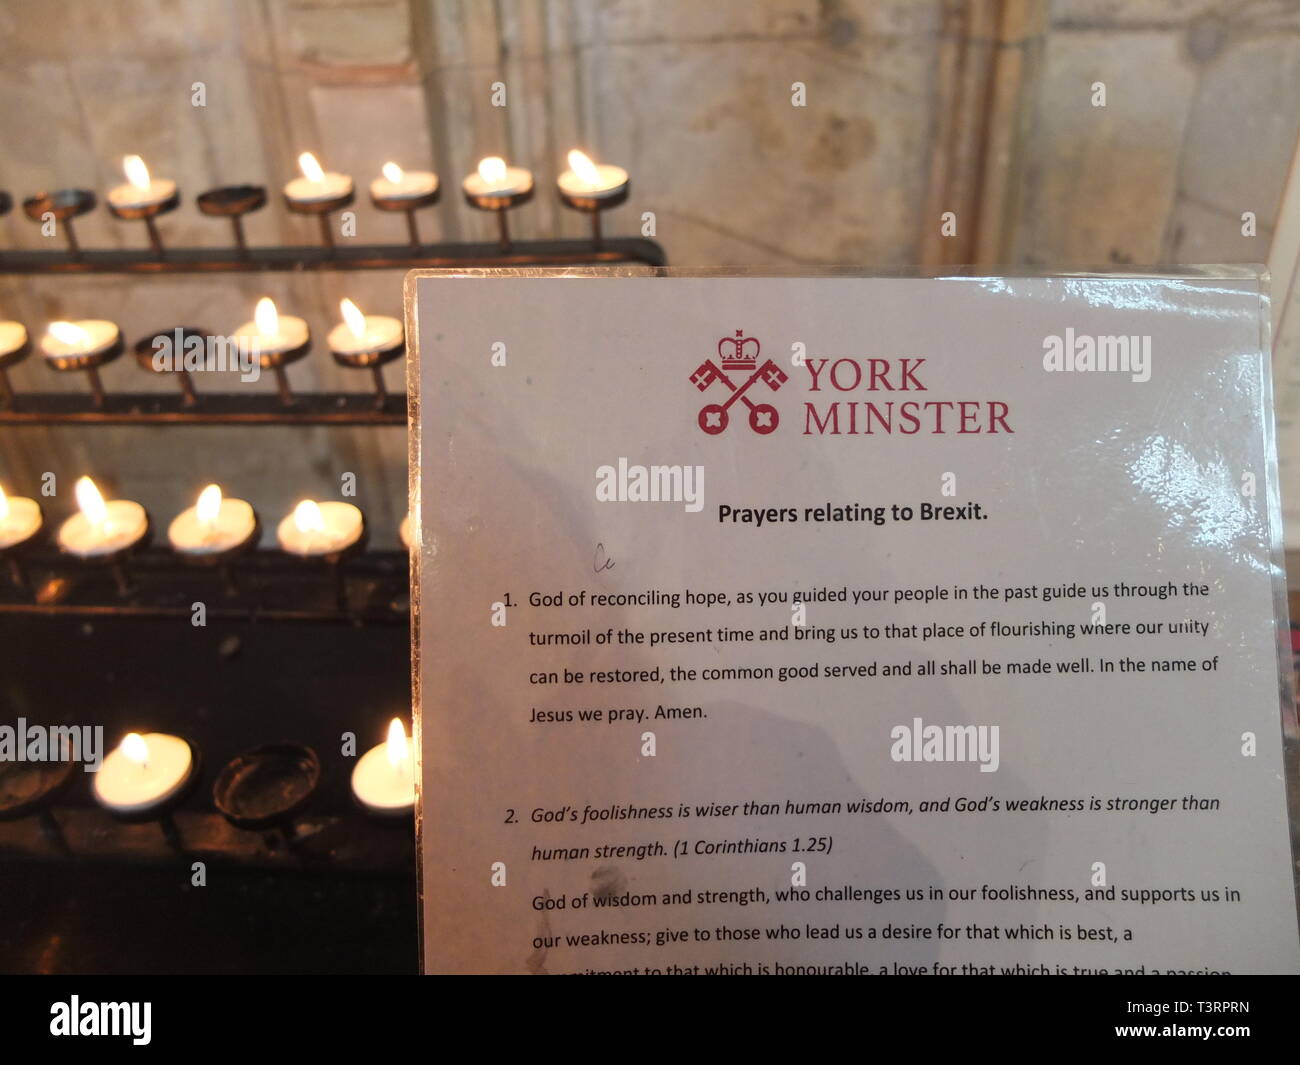 A selection of Prayers relating to Brexit on laminated card issued for visitors to York Minster UK. Backdrop of prayer candles. Brexit and religion. Stock Photo